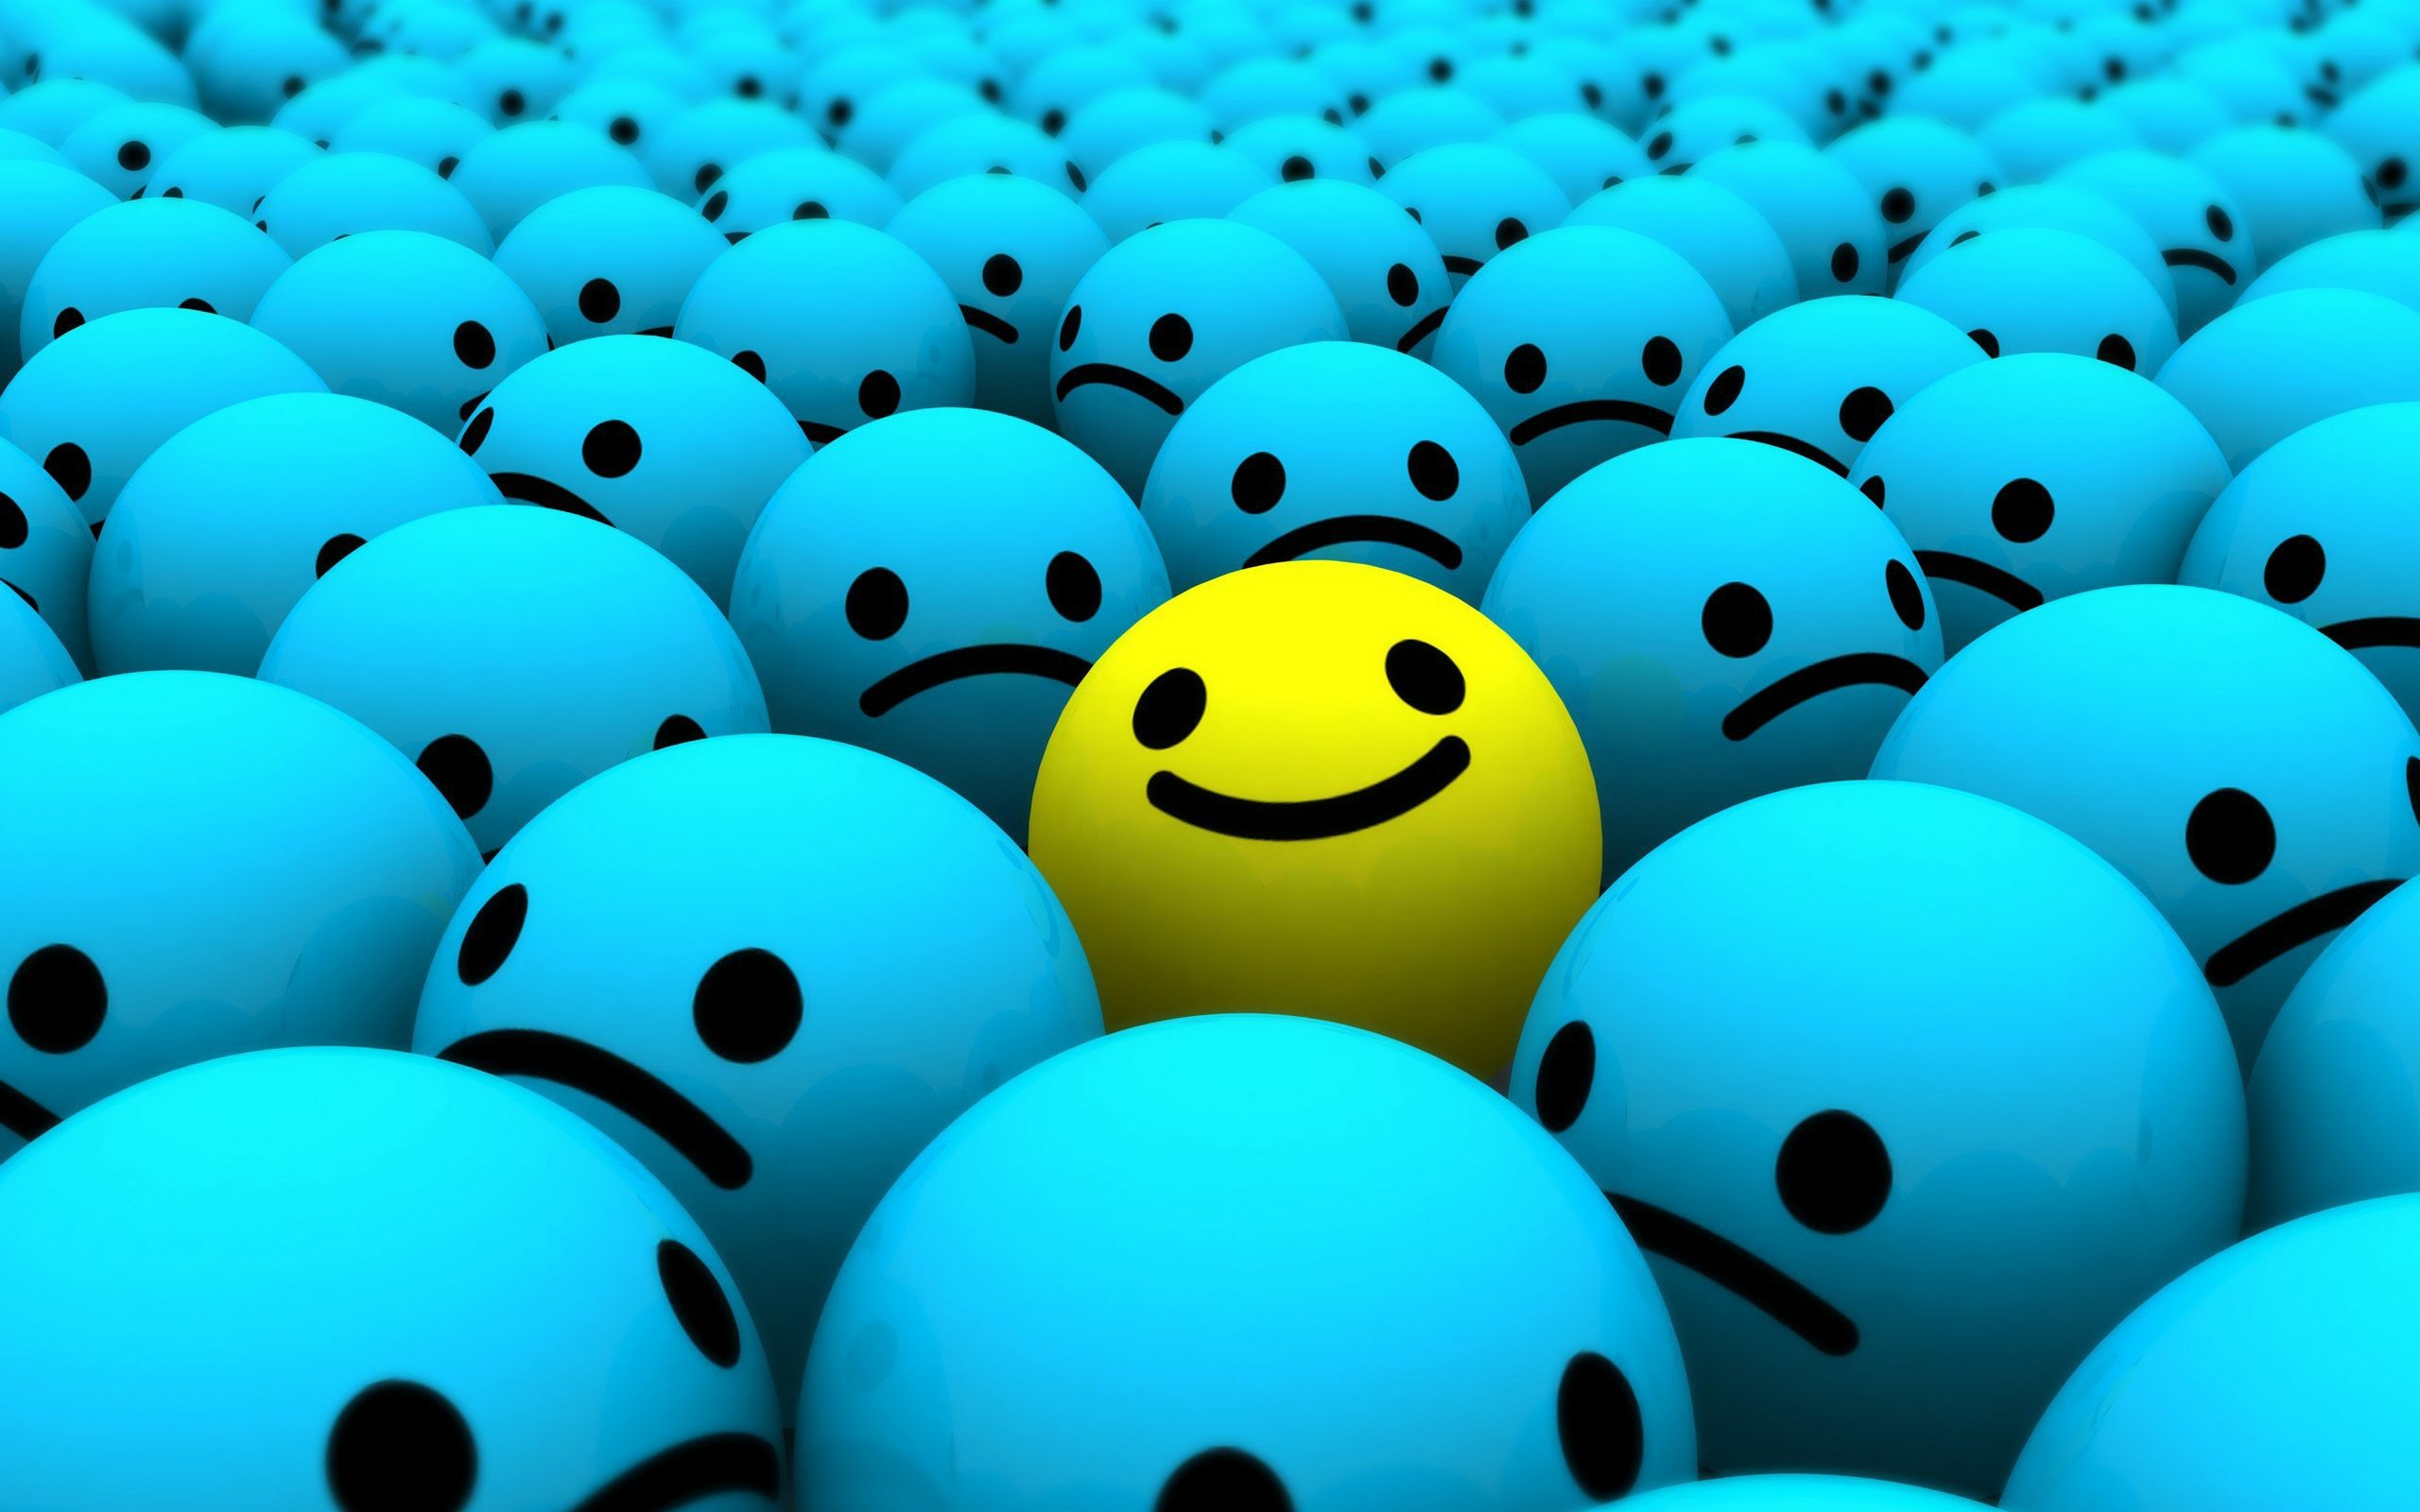 hd wallpaper download,emoticon,facial expression,smile,turquoise,smiley